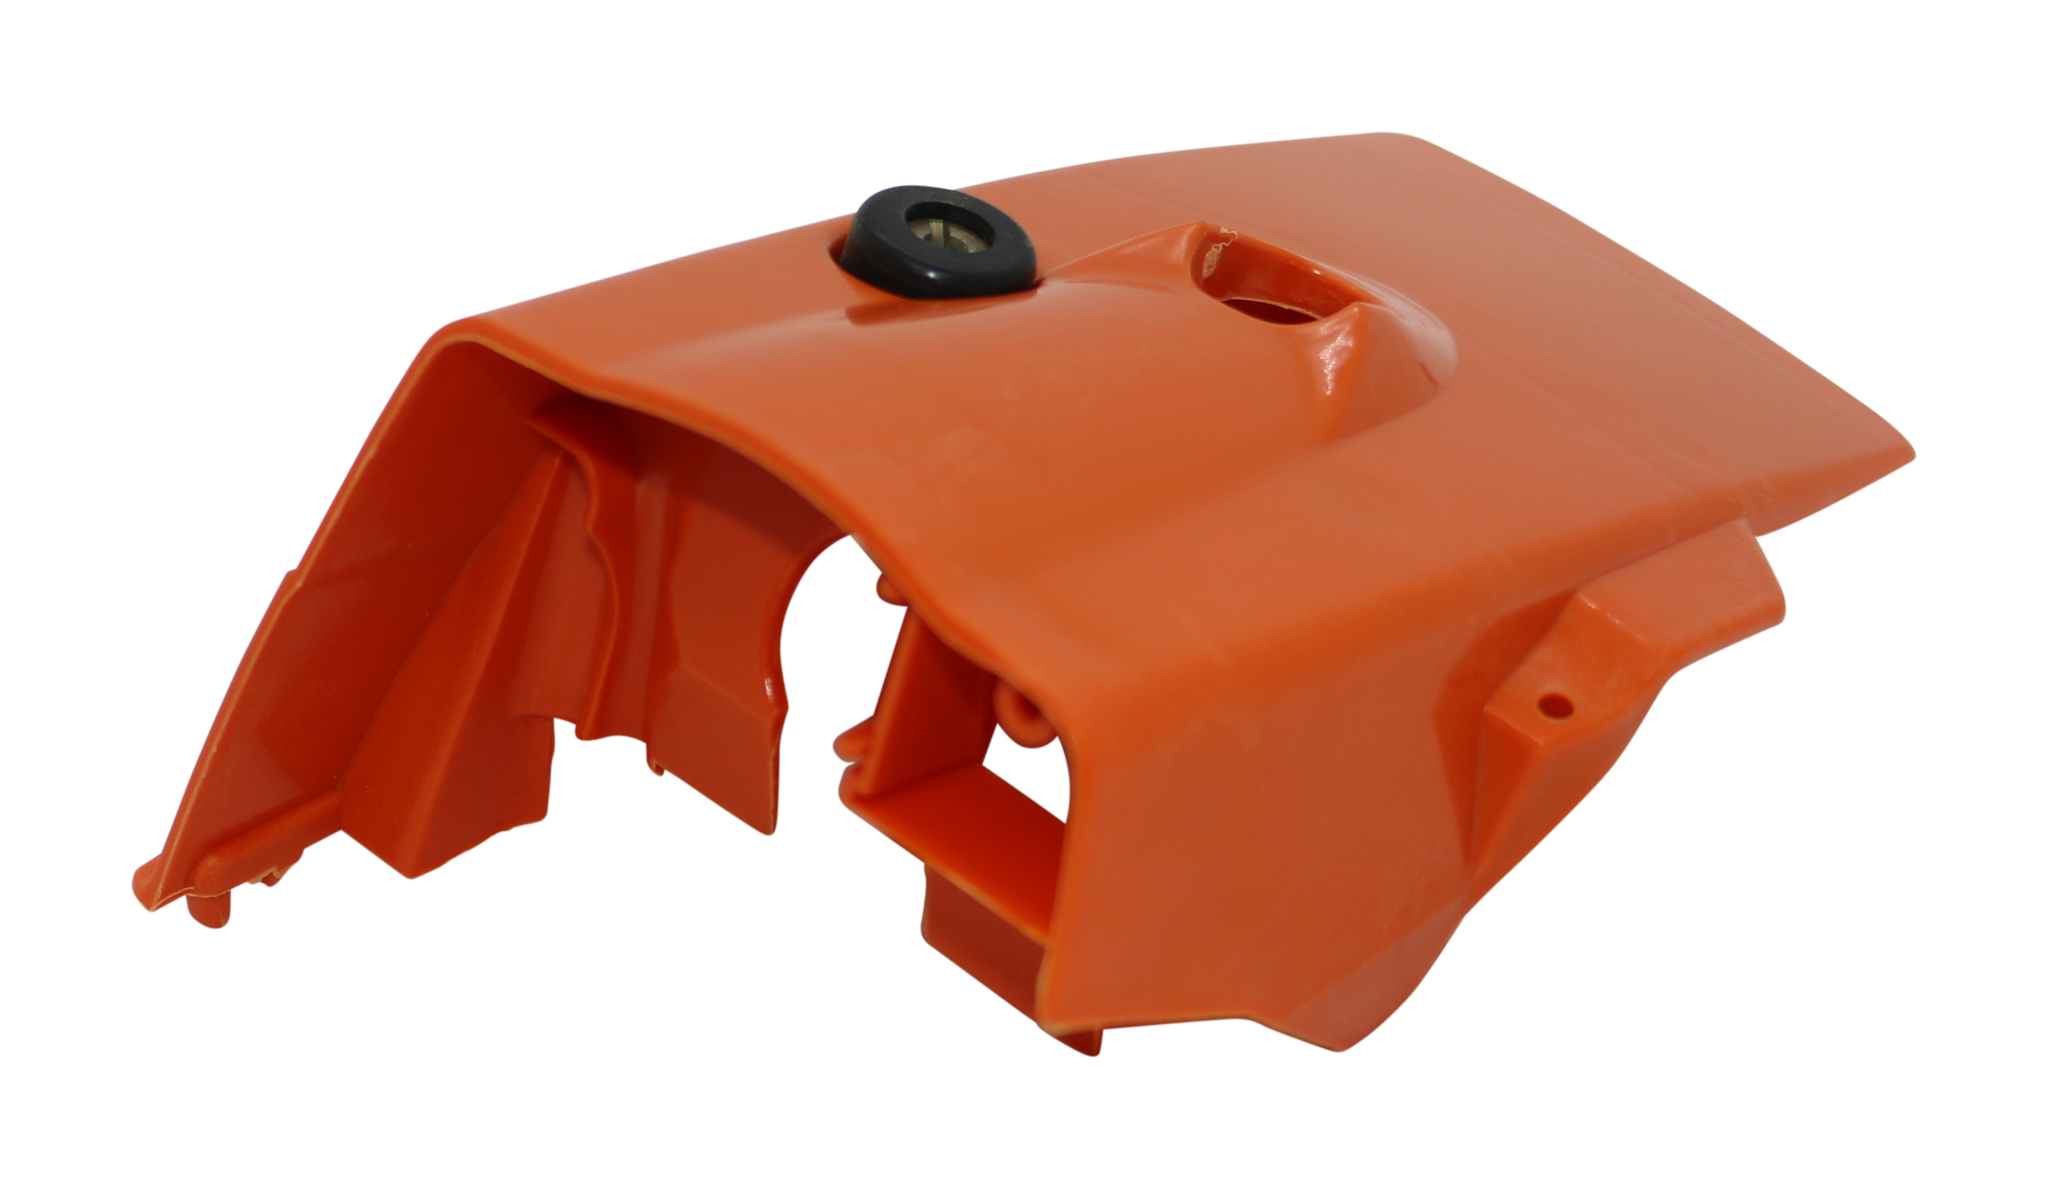 Top Cover for Stihl 026 MS260 replaces 1121 080 1605   PJ26003